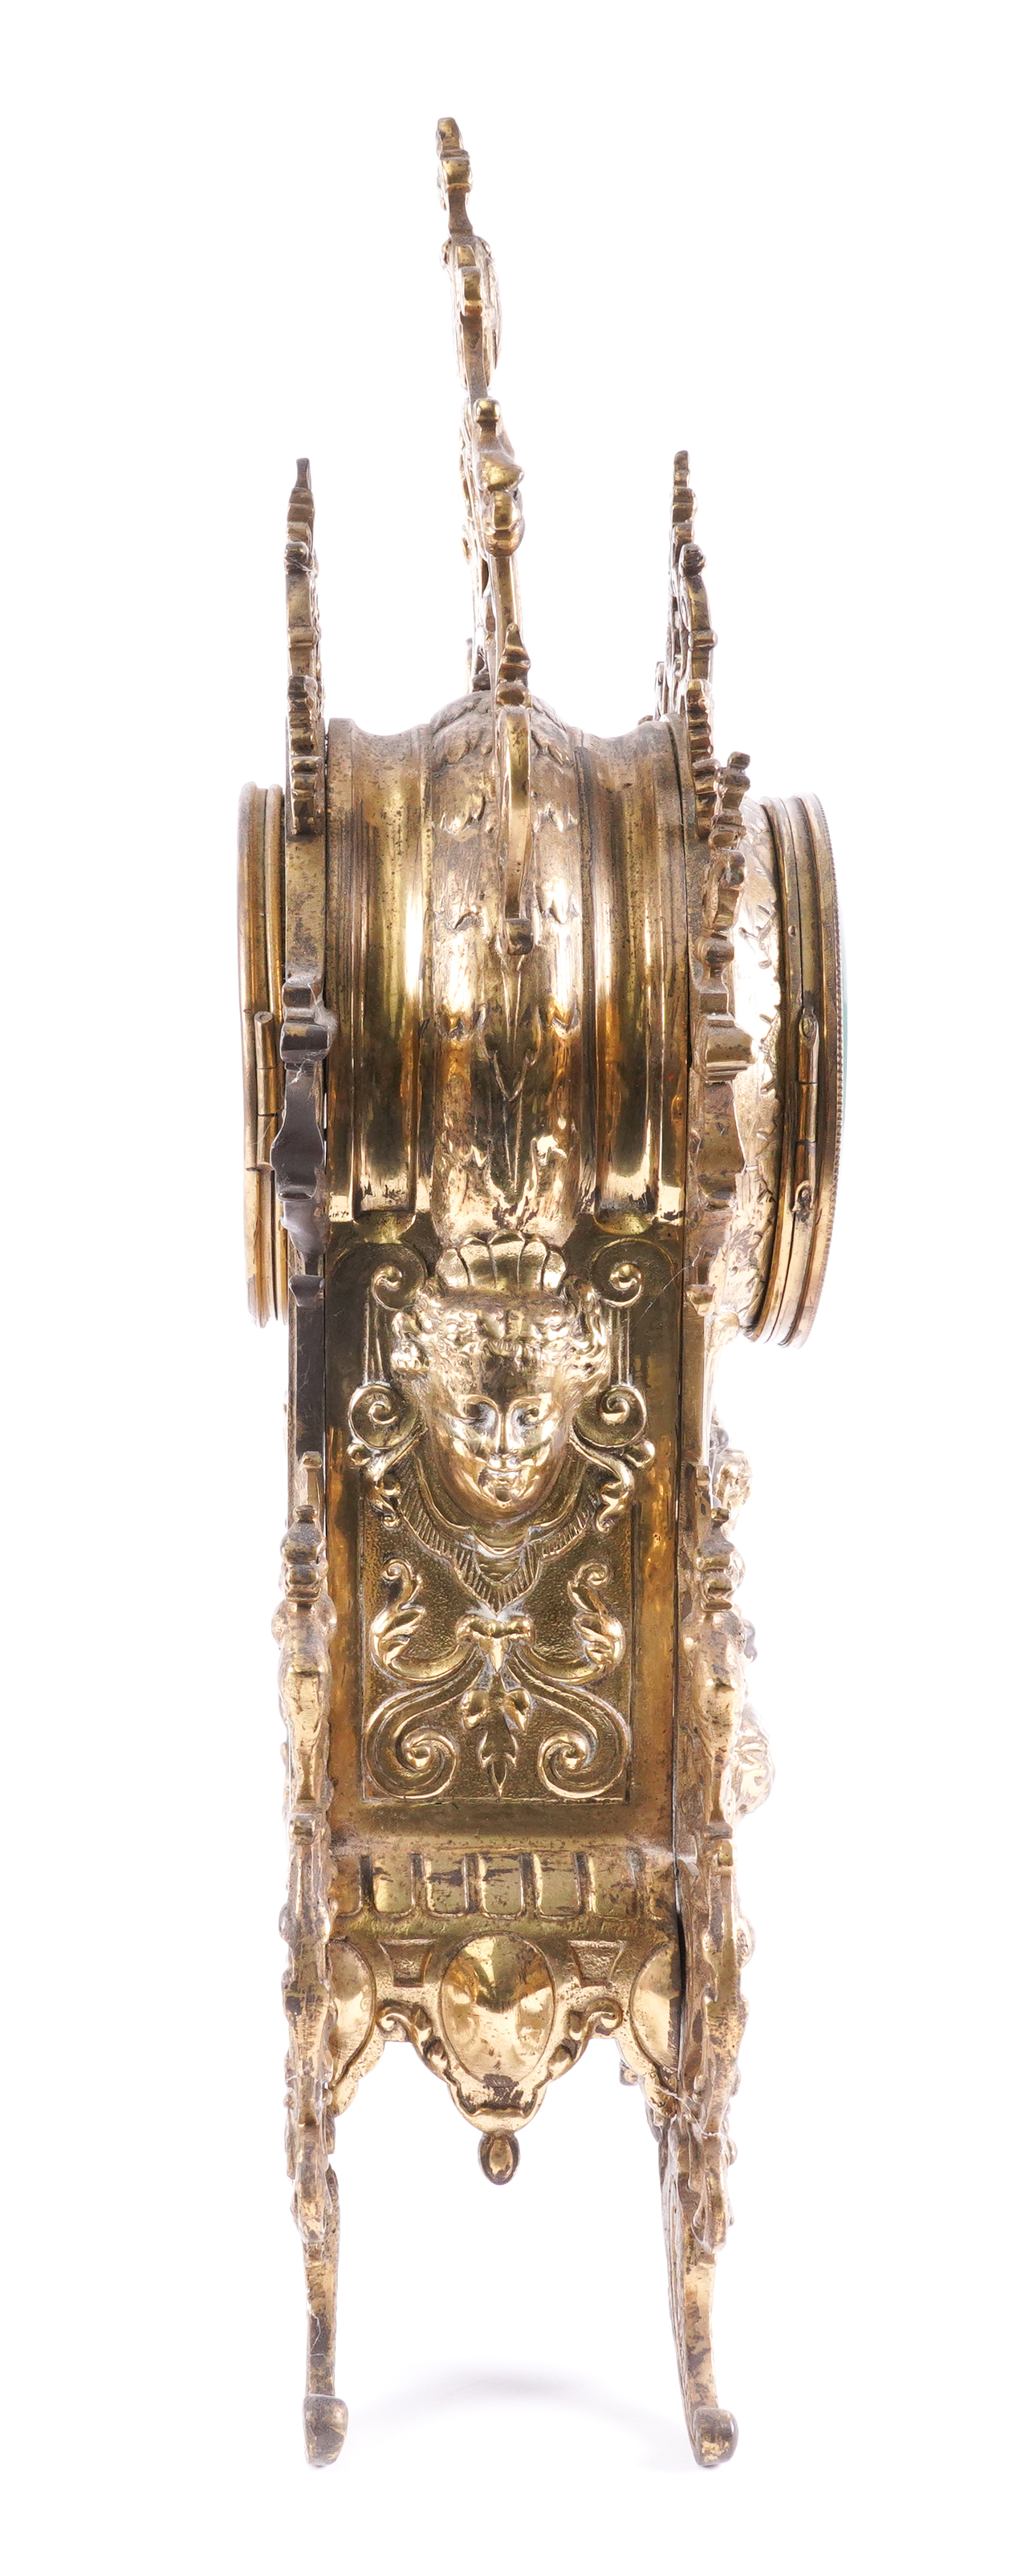 A FRENCH GILT-METAL MOUNTED MANTEL CLOCK - Image 5 of 5